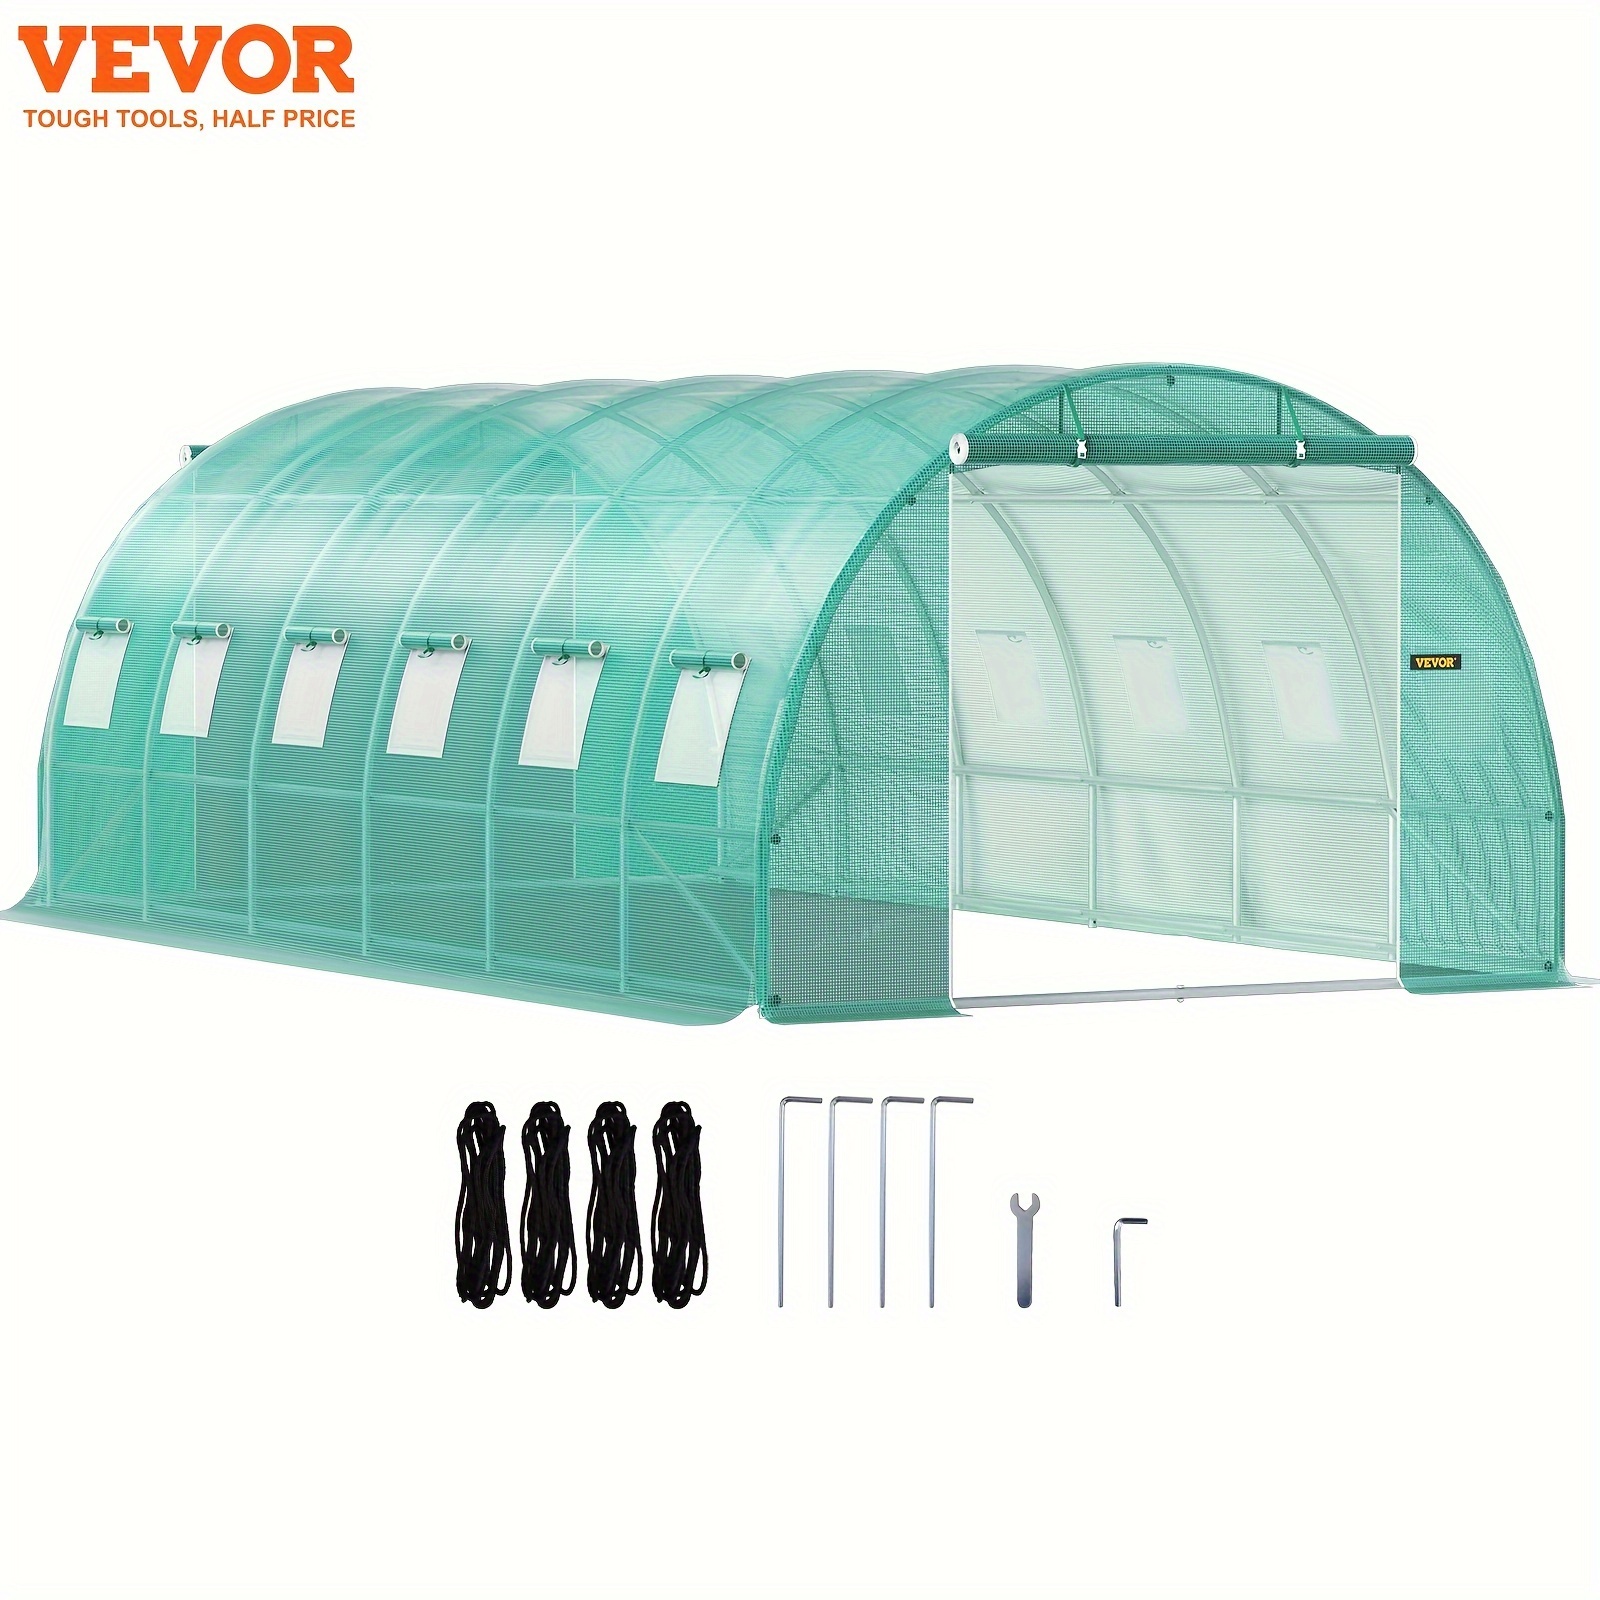 

Walk In Tunnel Greenhouse, 20 X 10 X 7 Ft Portable Plant Hot House W/ Galvanized Steel Hoops, 3 Top Beams, Diagonal Poles, 2 Zippered Doors & 12 Roll-up Windows, Green